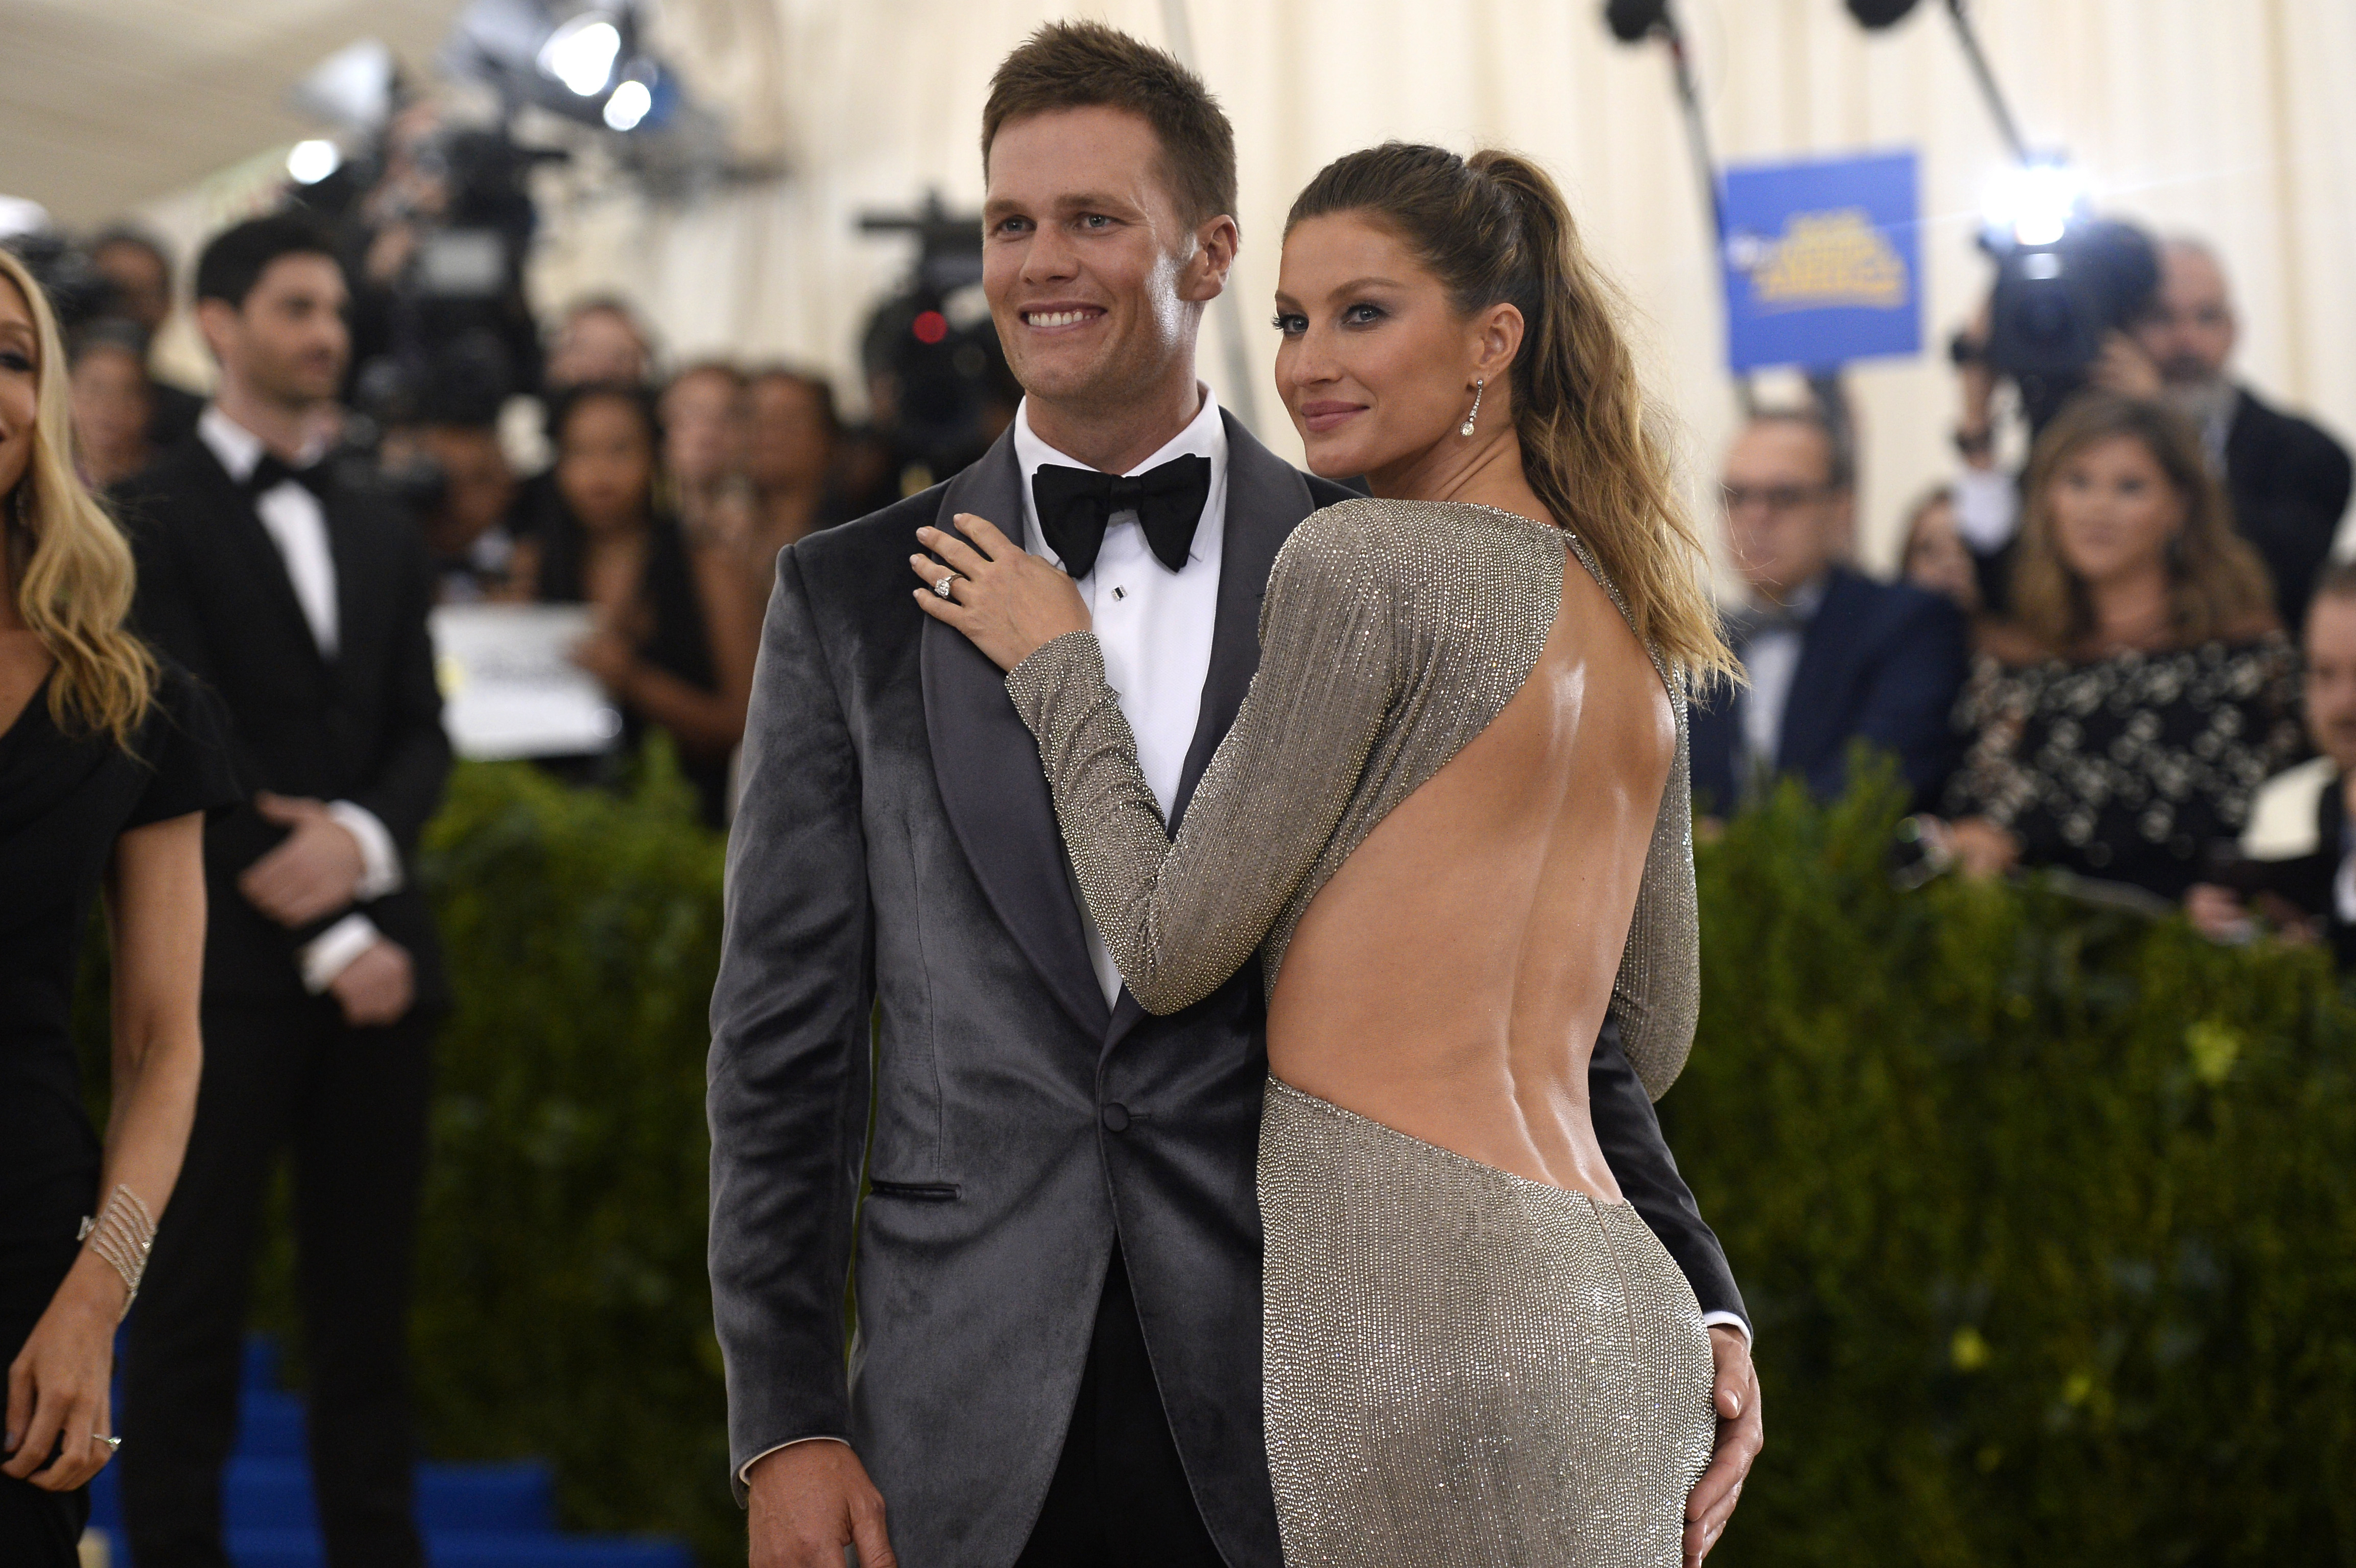 Tom Brady and Gisele Bündchen pose together; he&#x27;s in a suit and bow tie, she wears a backless dress, at a red carpet event